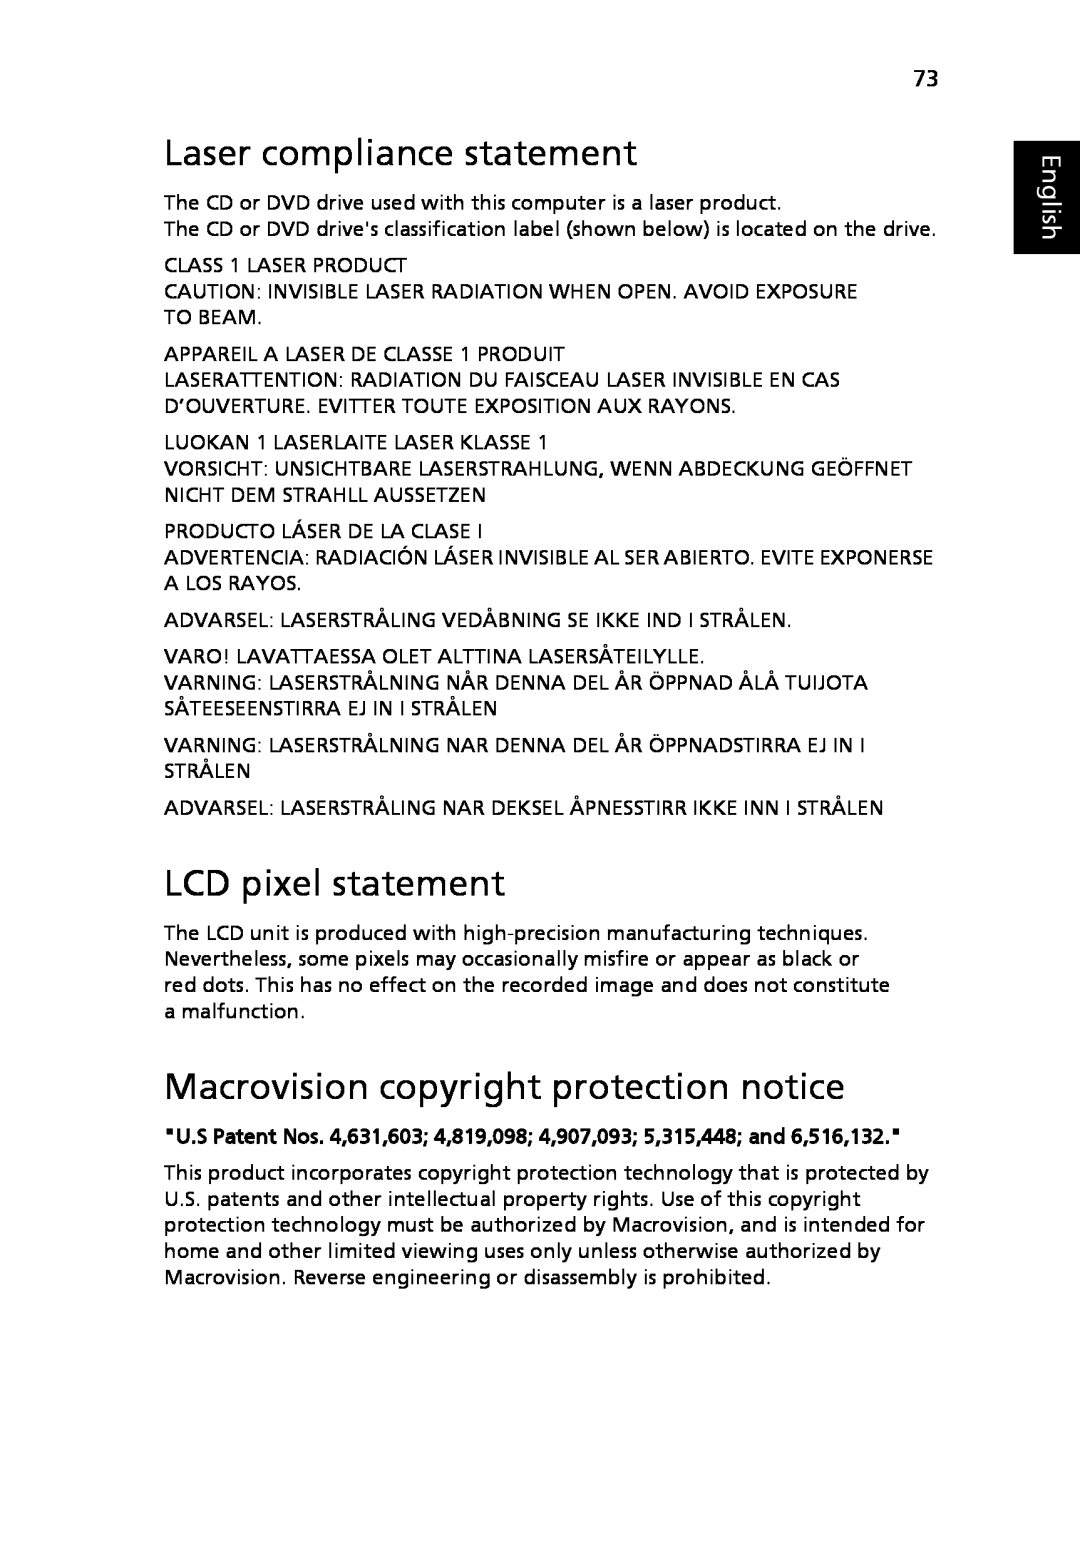 Acer 3040 Series manual Laser compliance statement, LCD pixel statement, Macrovision copyright protection notice, English 